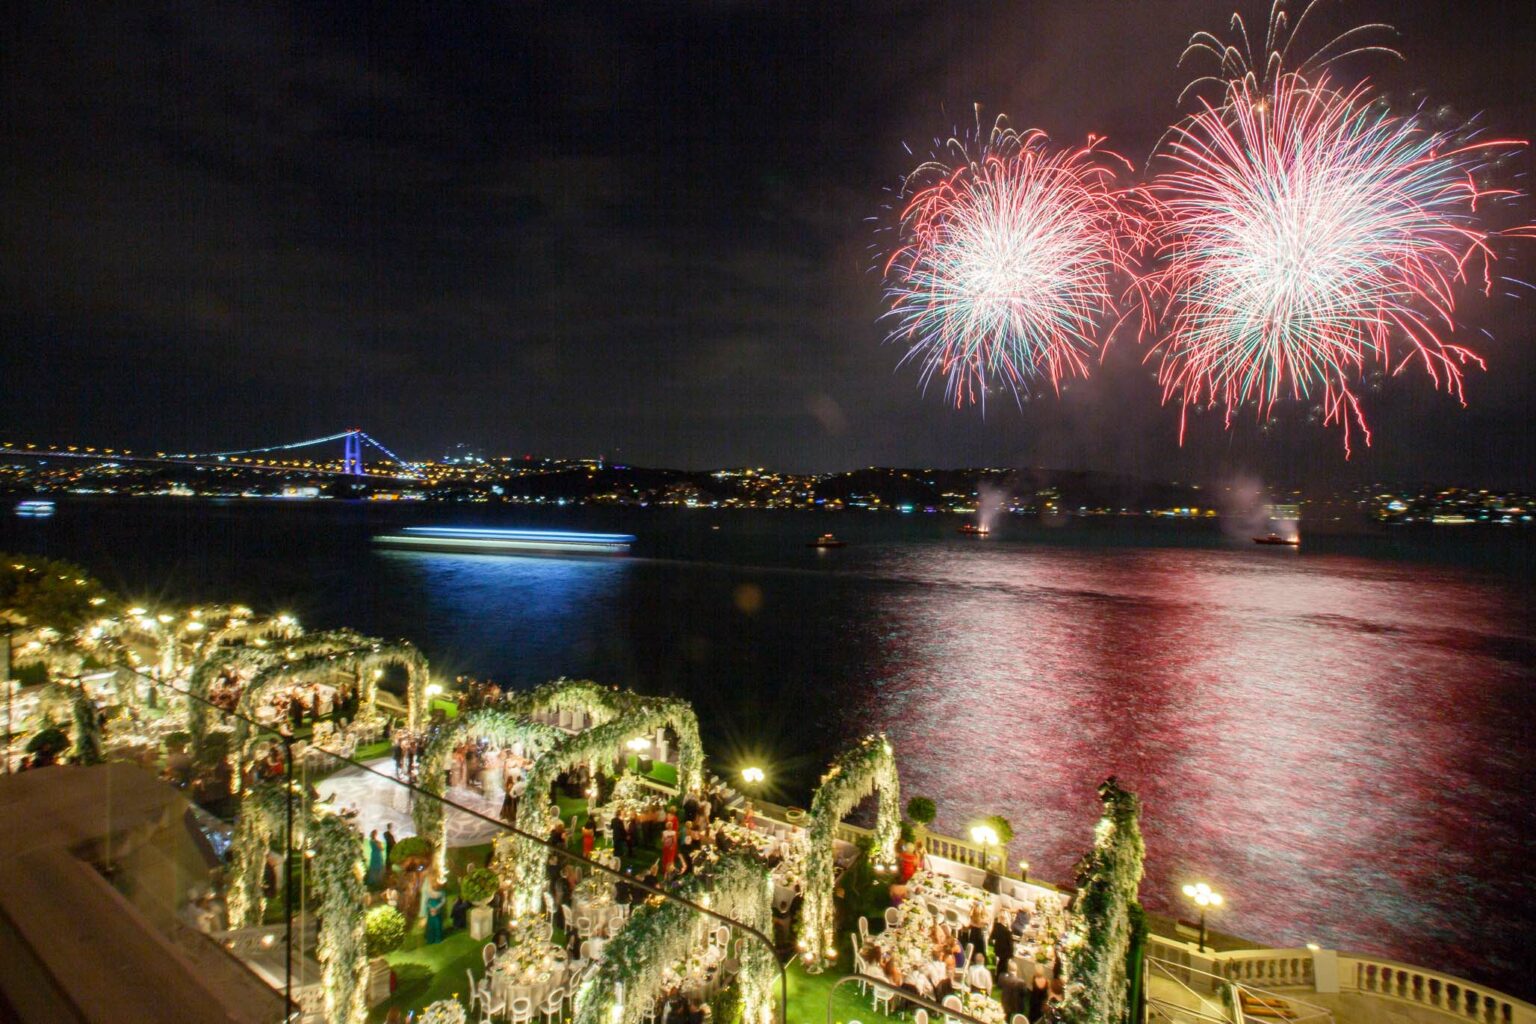 fireworks exploding in the air over water next to an outdoor event reception.